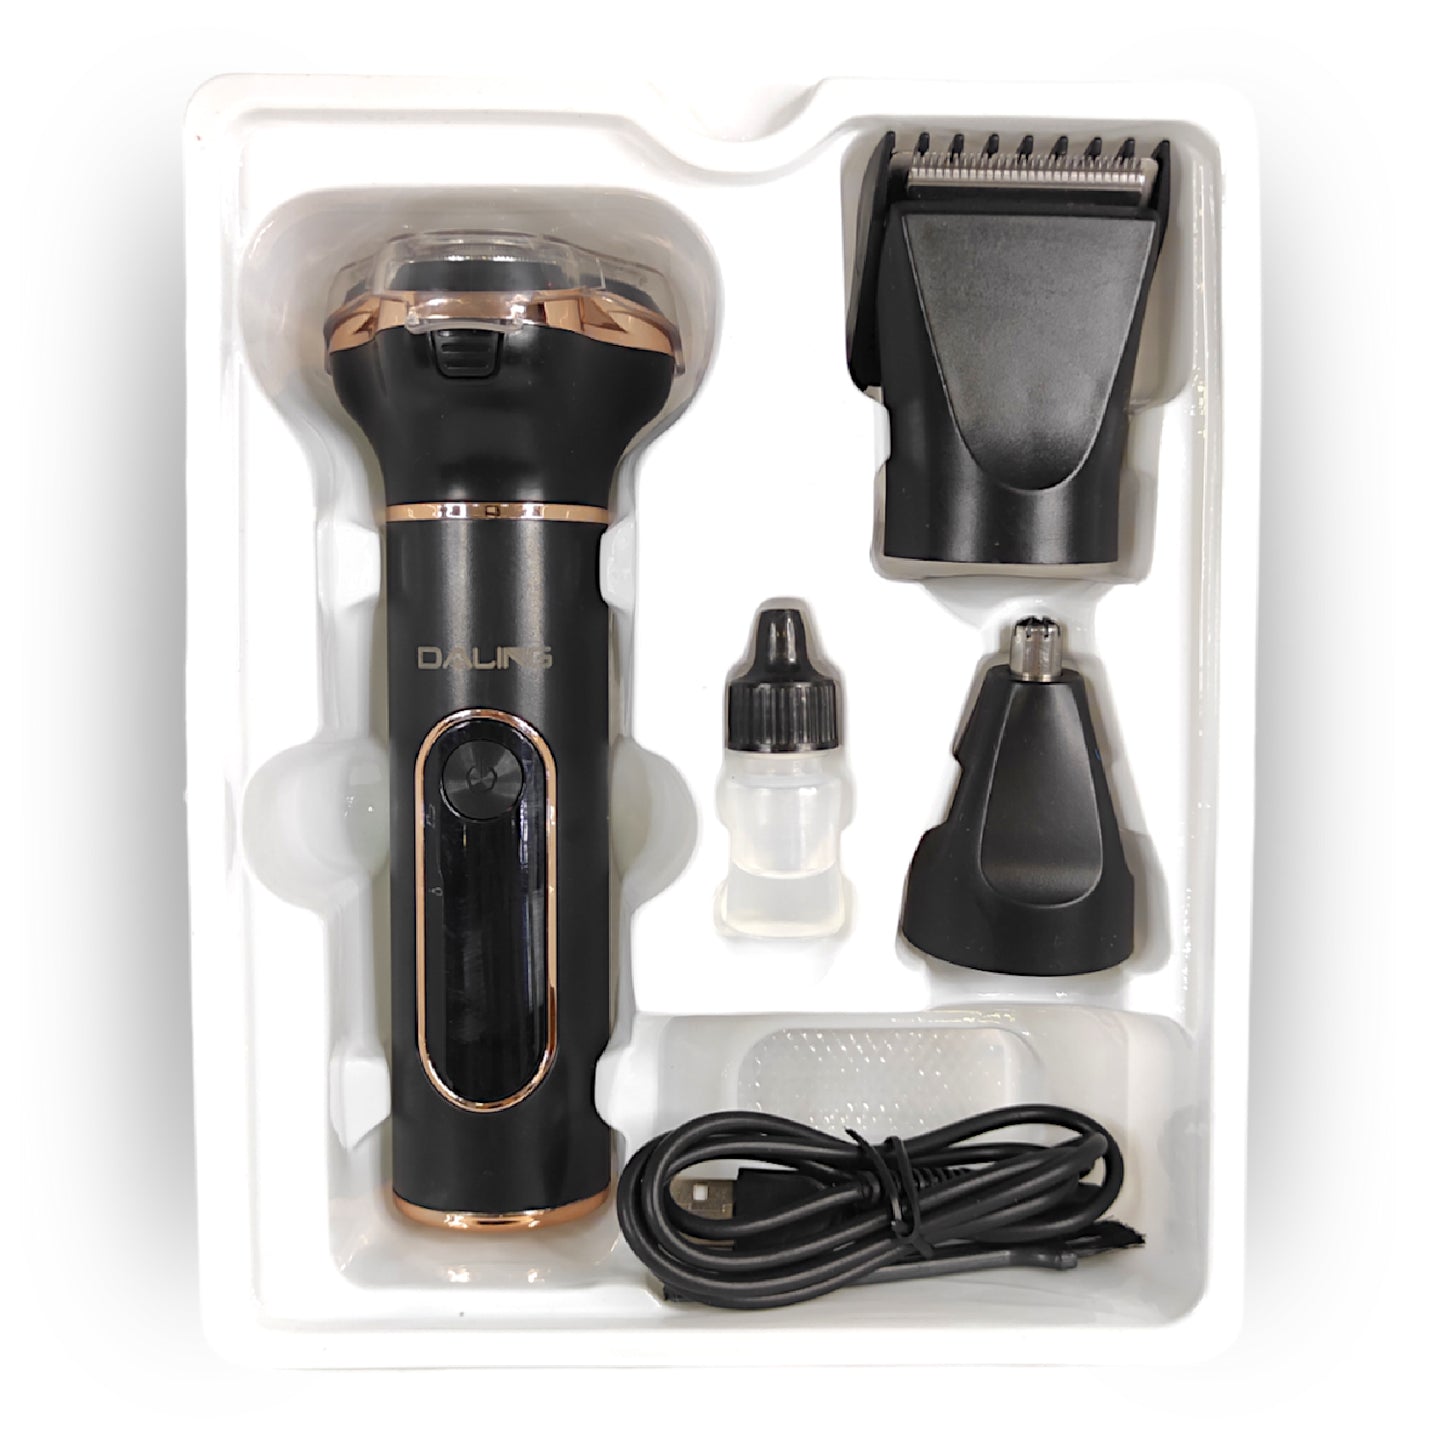 3 in 1 Rechargeable Grooming Kit - Trimmer - Shaver - DALING DL-9216